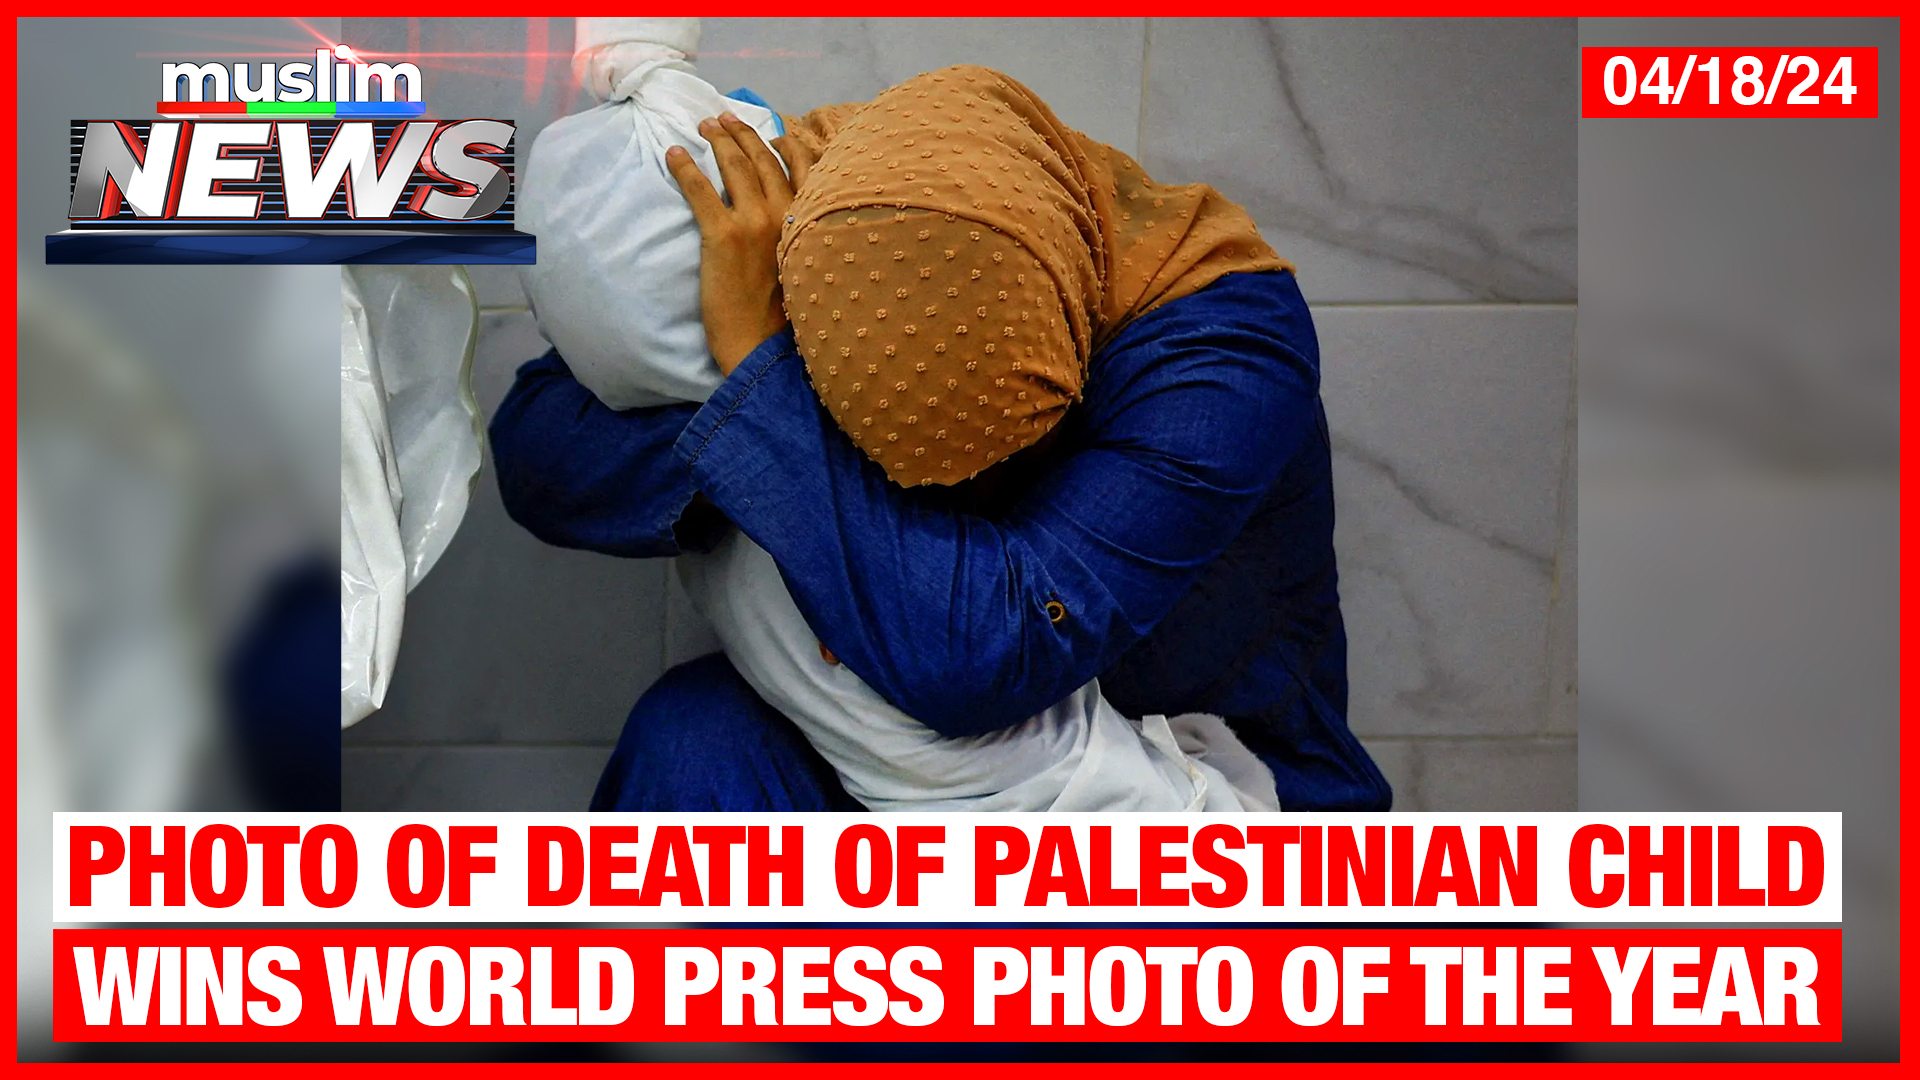 Photo Of Death Of Palestinian Child Wins World Press Photo Of The Year | Muslim News | Apr 17, 2024